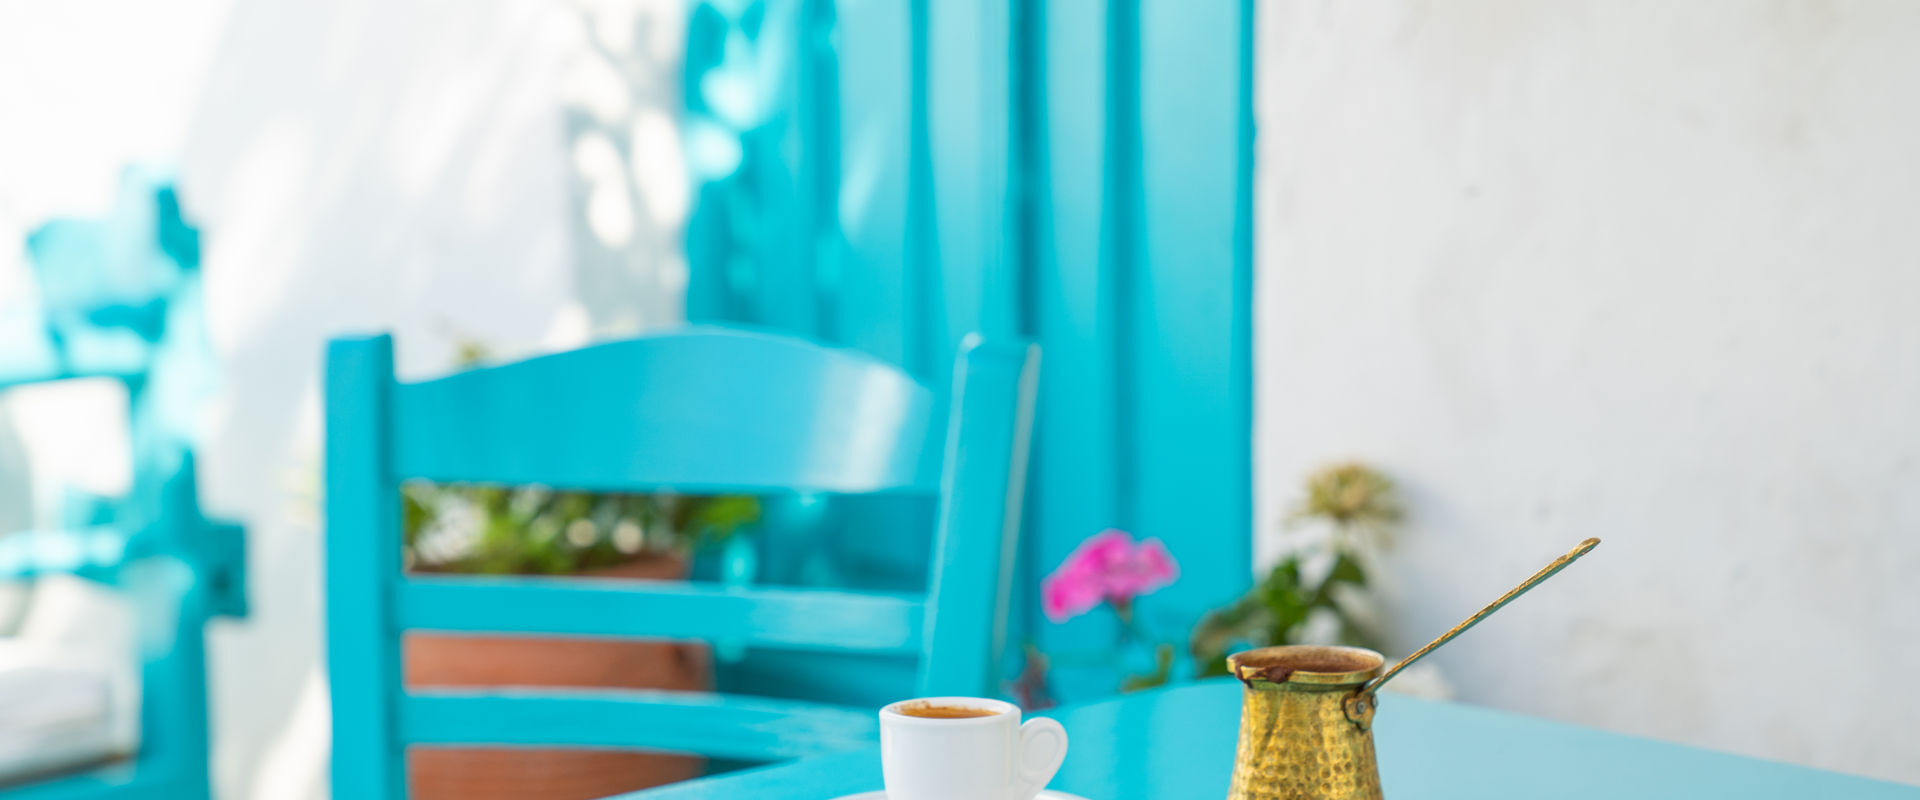 Legend says that when you have an afternoon coffee in a beautiful island square in the Cyclades, time stops.